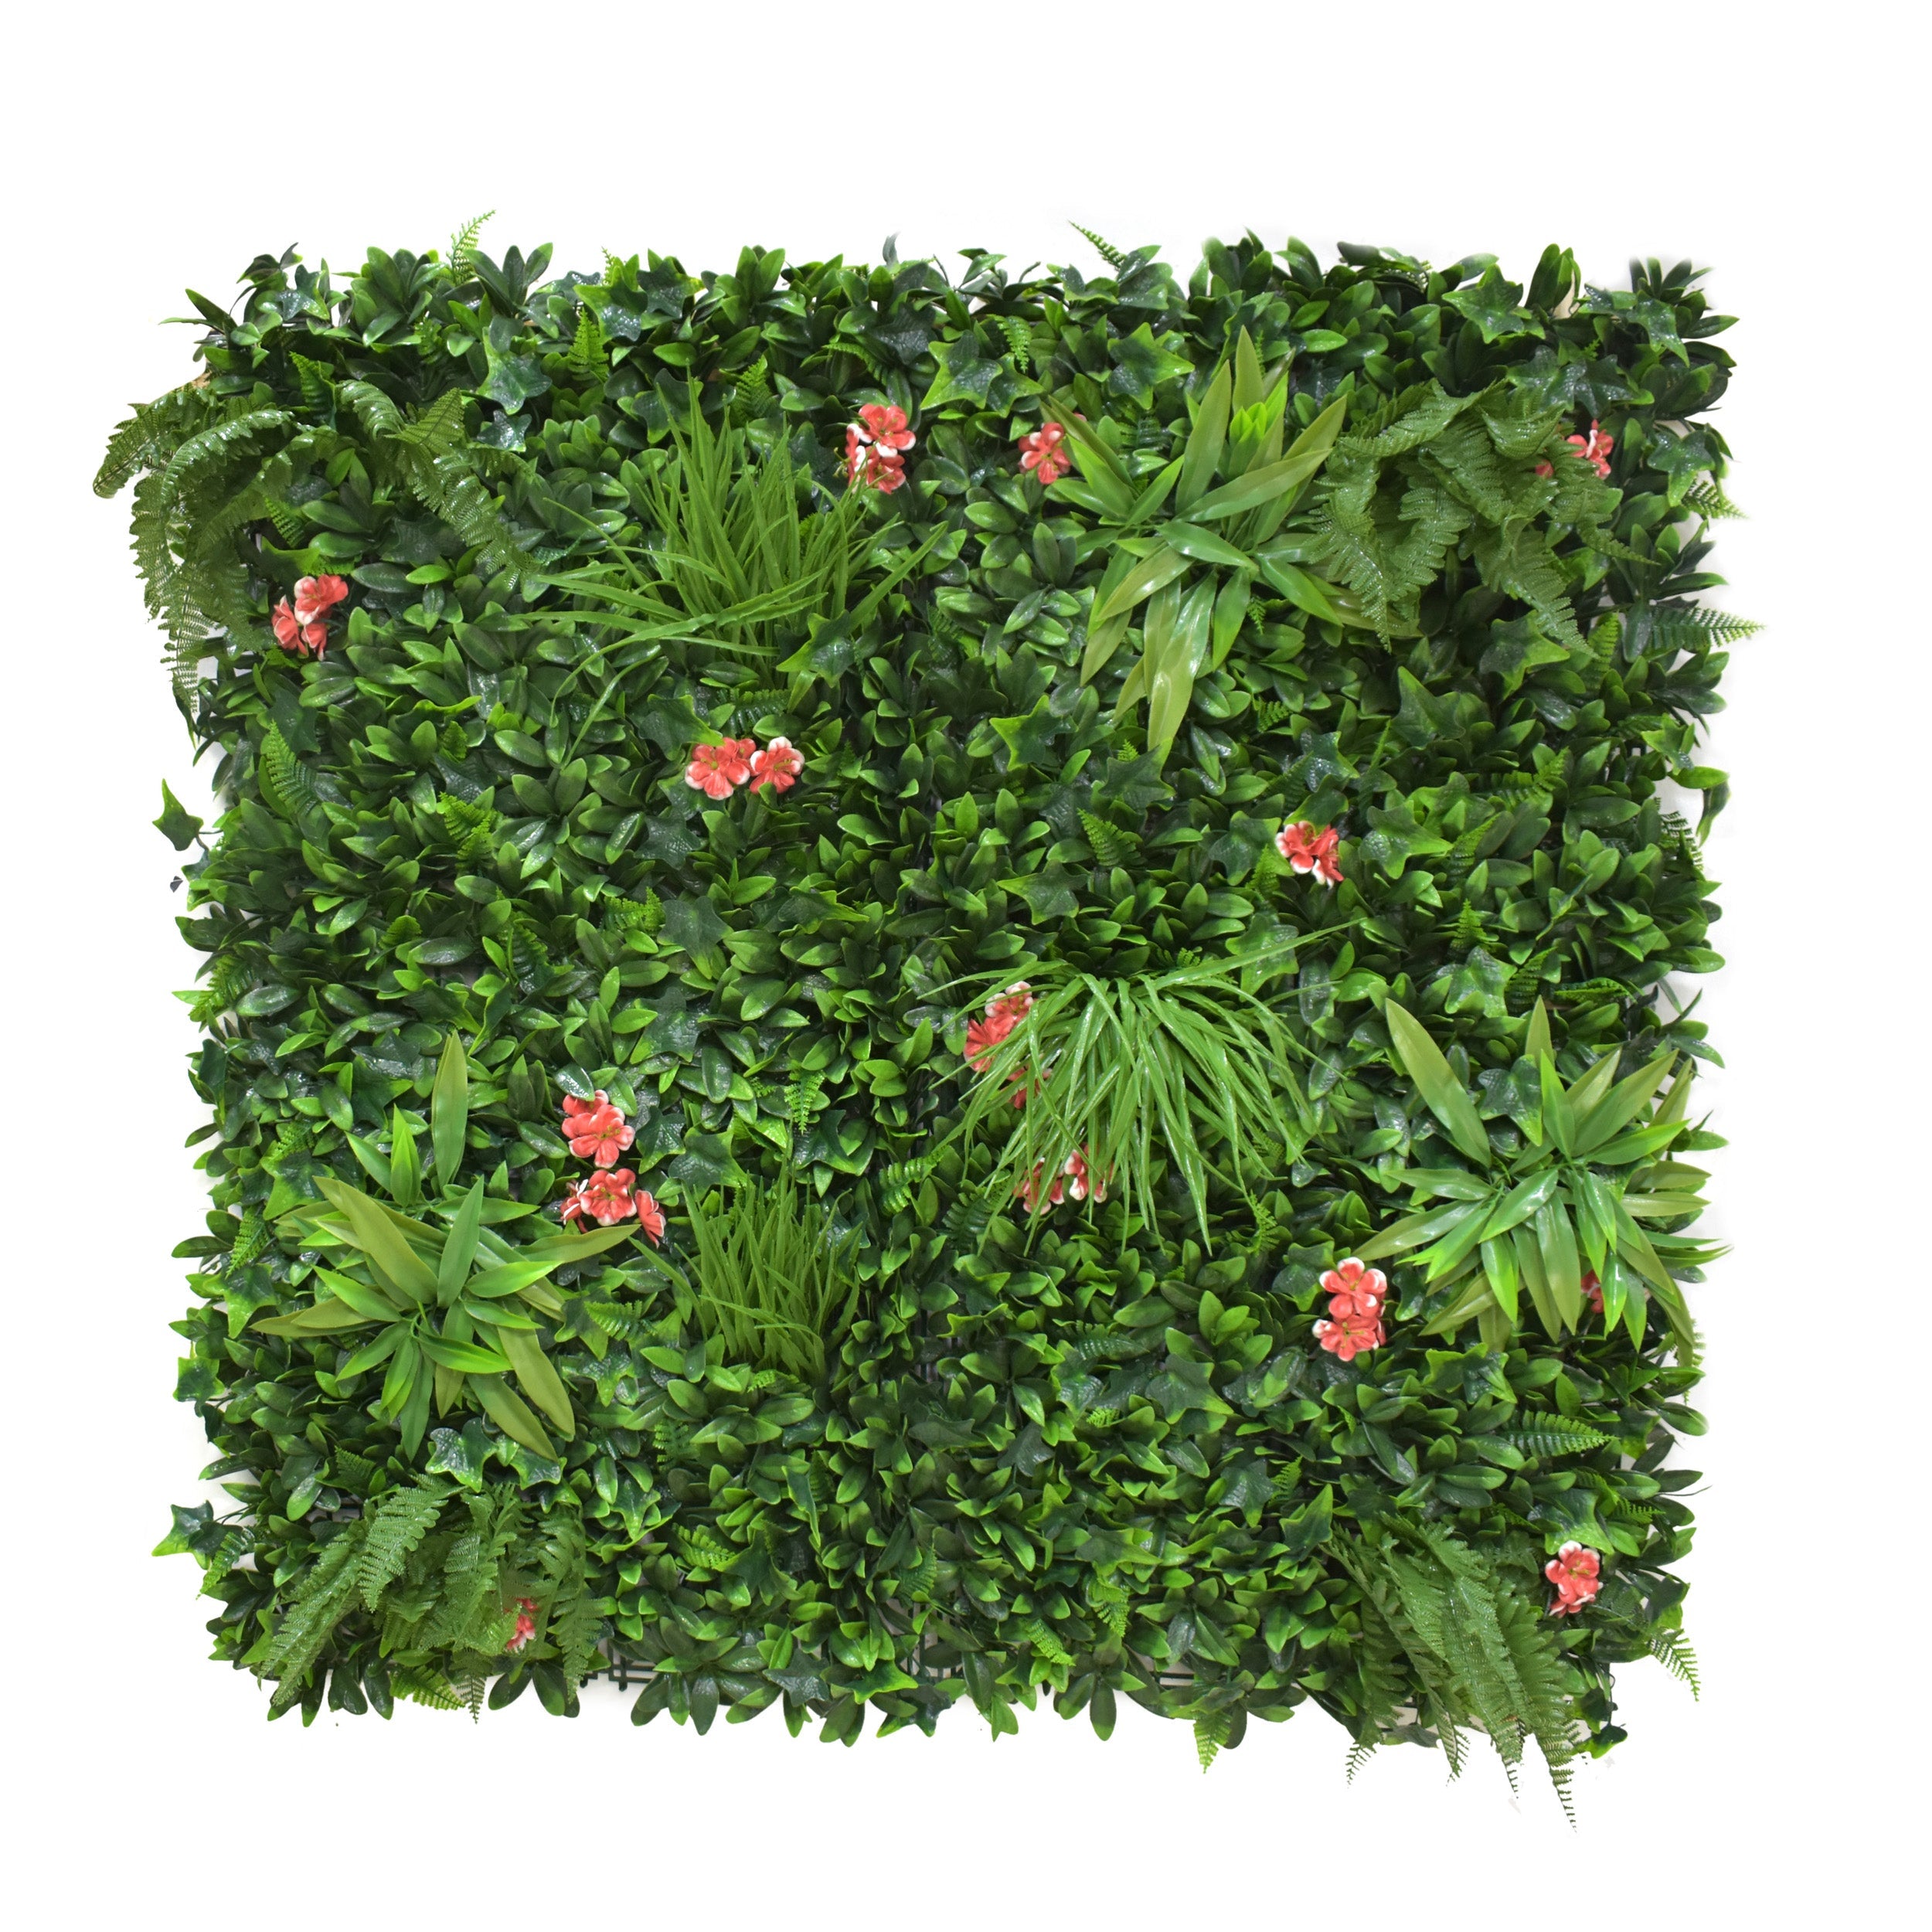 Aavana Greens Artificial Vertical Garden Wall Panel 100X100 CM For Home & Office Decoration 100% UV Indoor And Outdoor Use Option 24